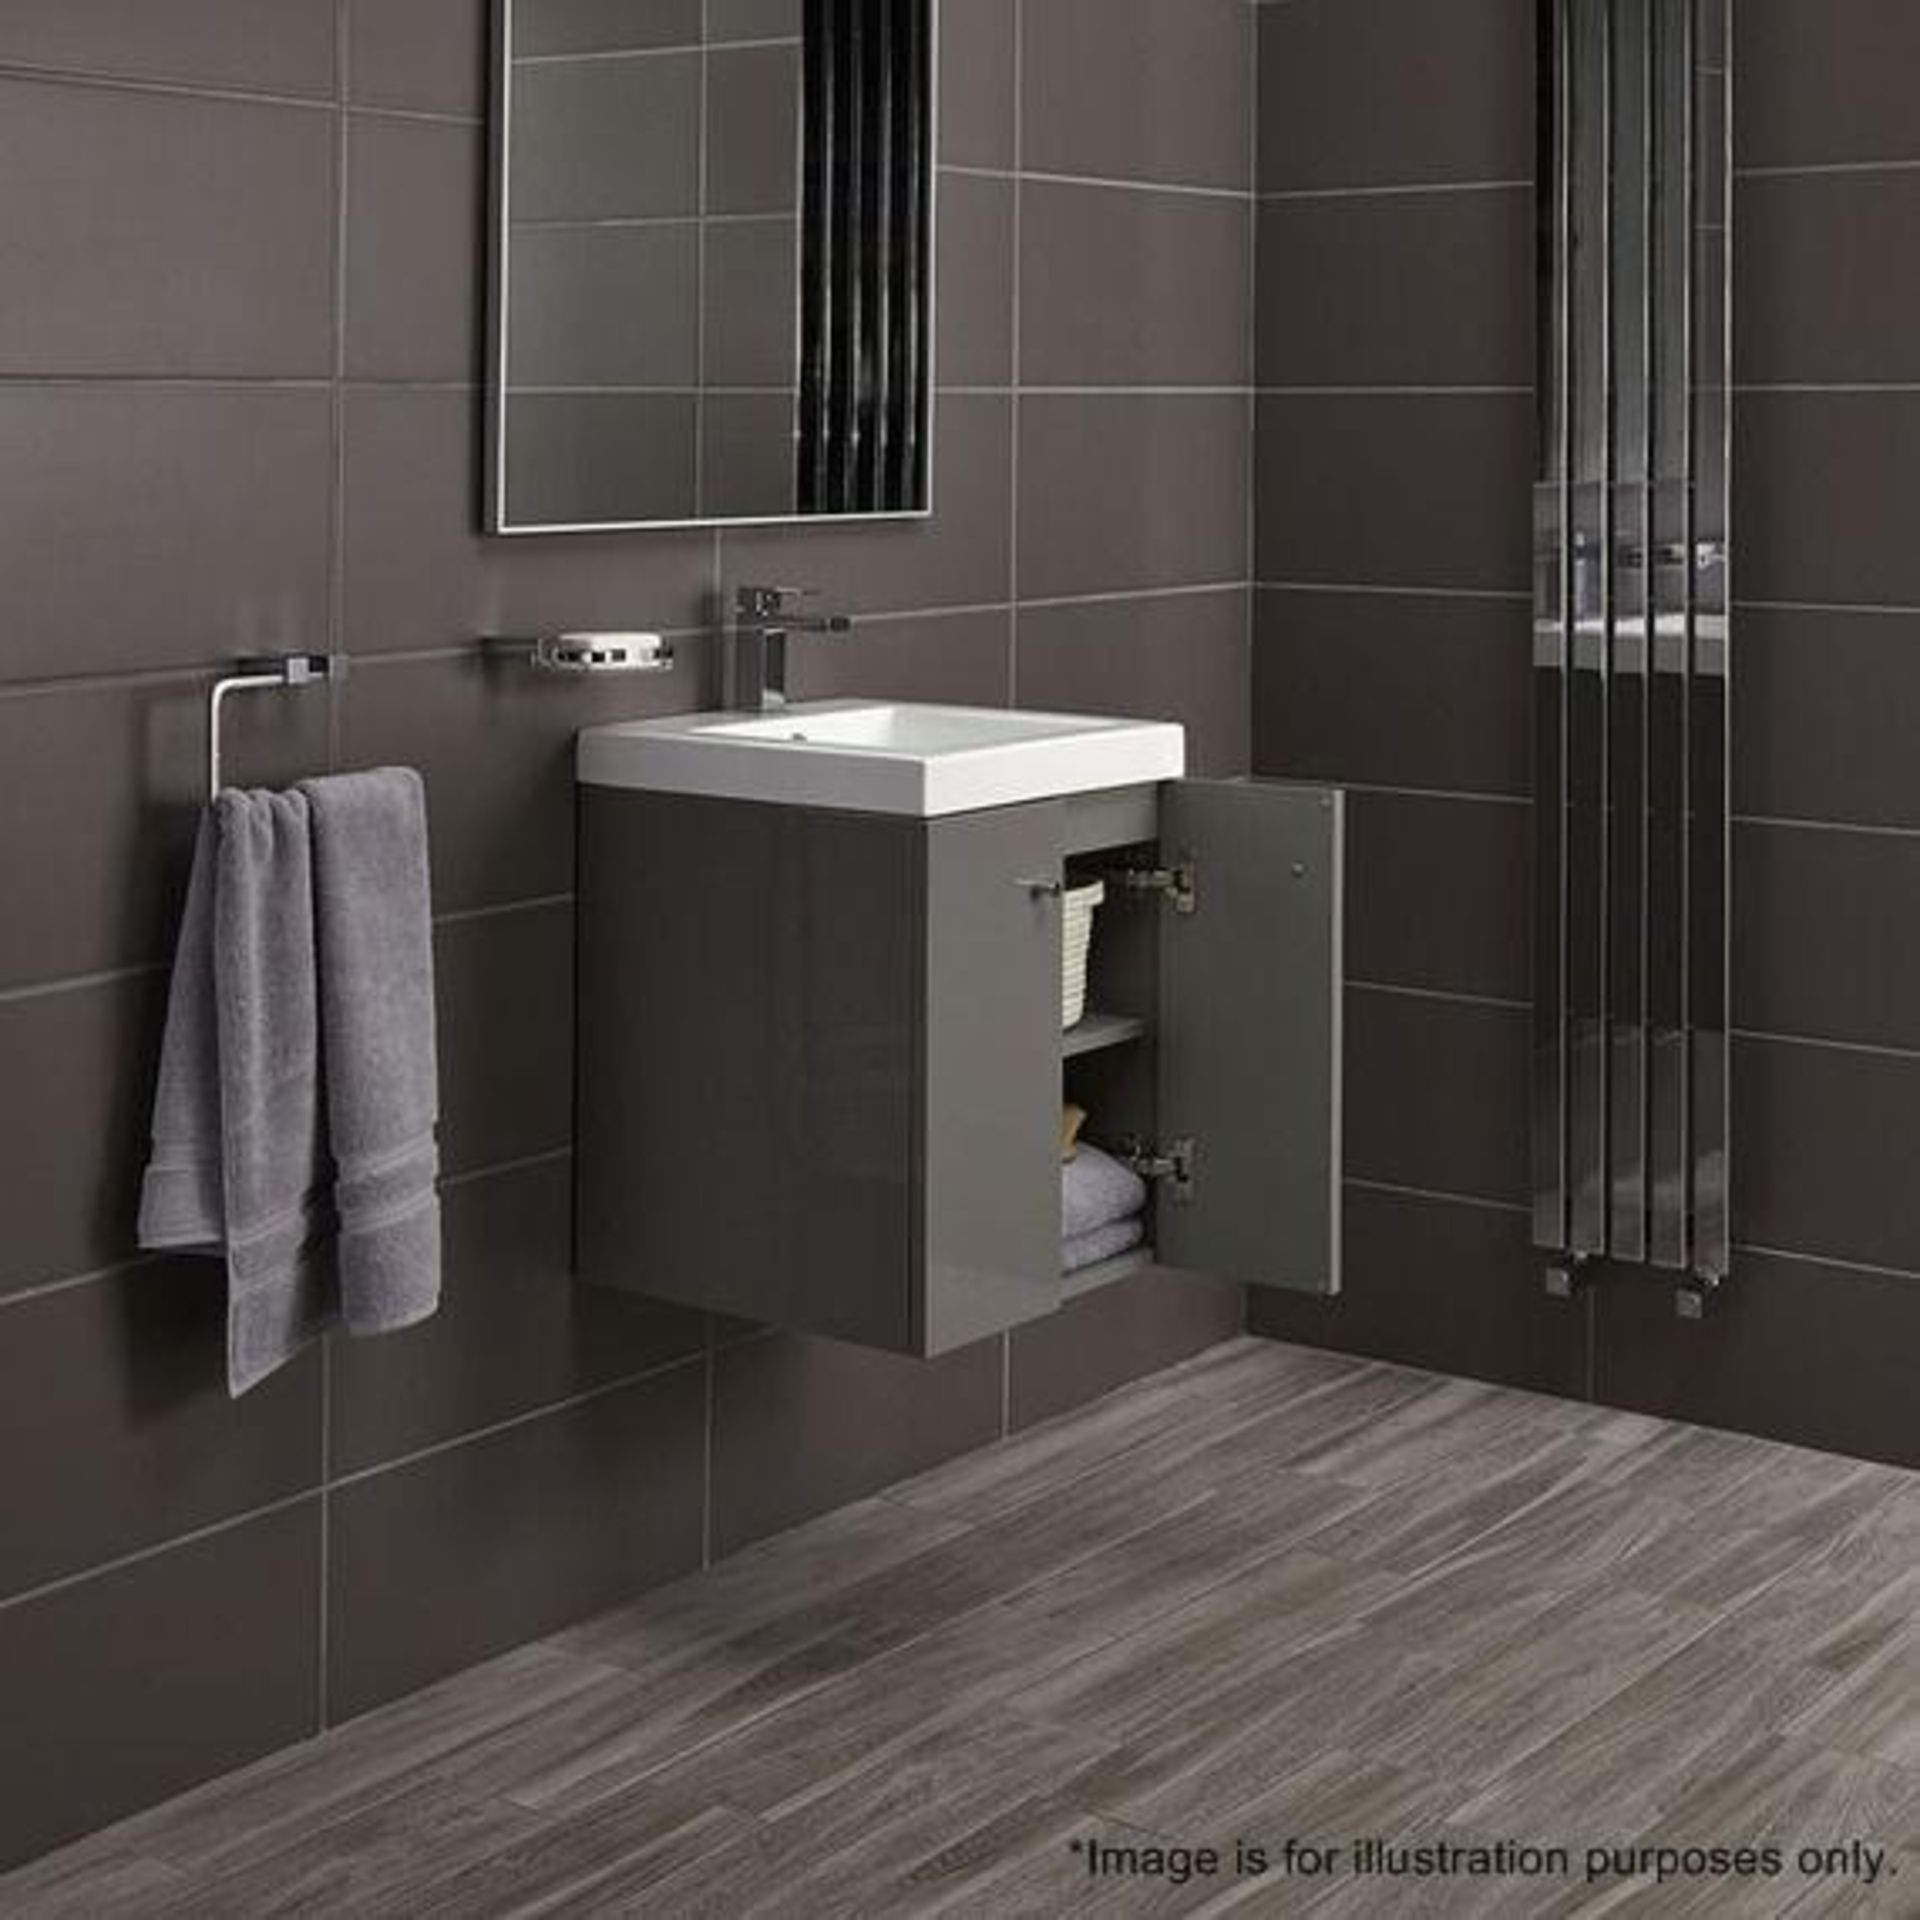 5 x Alpine Duo 400 Wall Hung Vanity Units In Gloss Grey - Brand New Boxed Stock - Dimensions: H49 x - Image 4 of 5